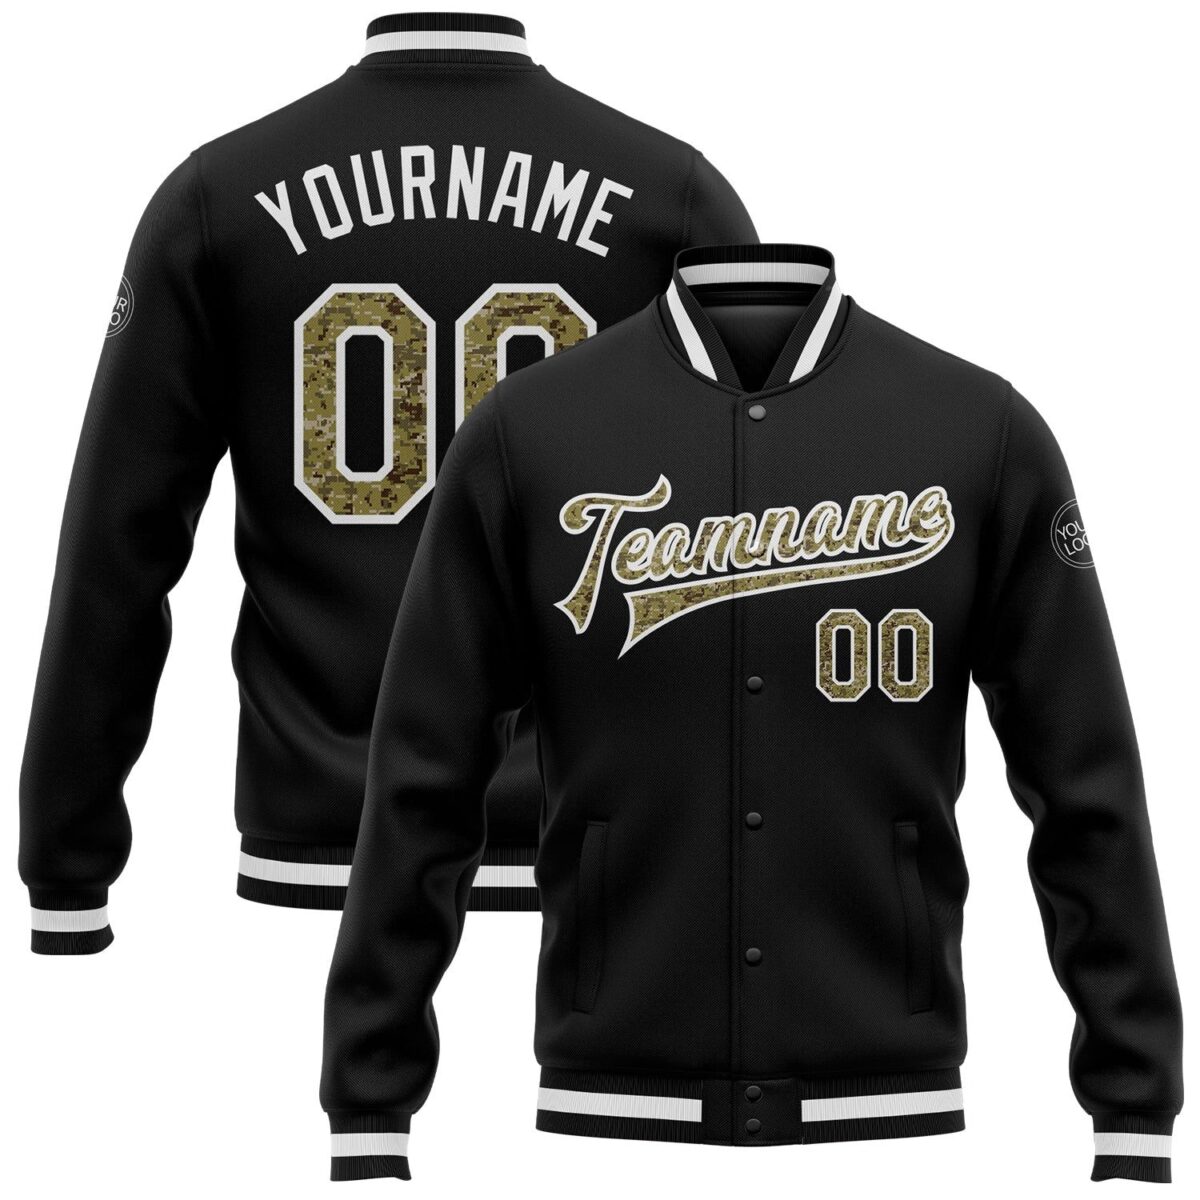 College Student Baseball Jackets with Black & White 1